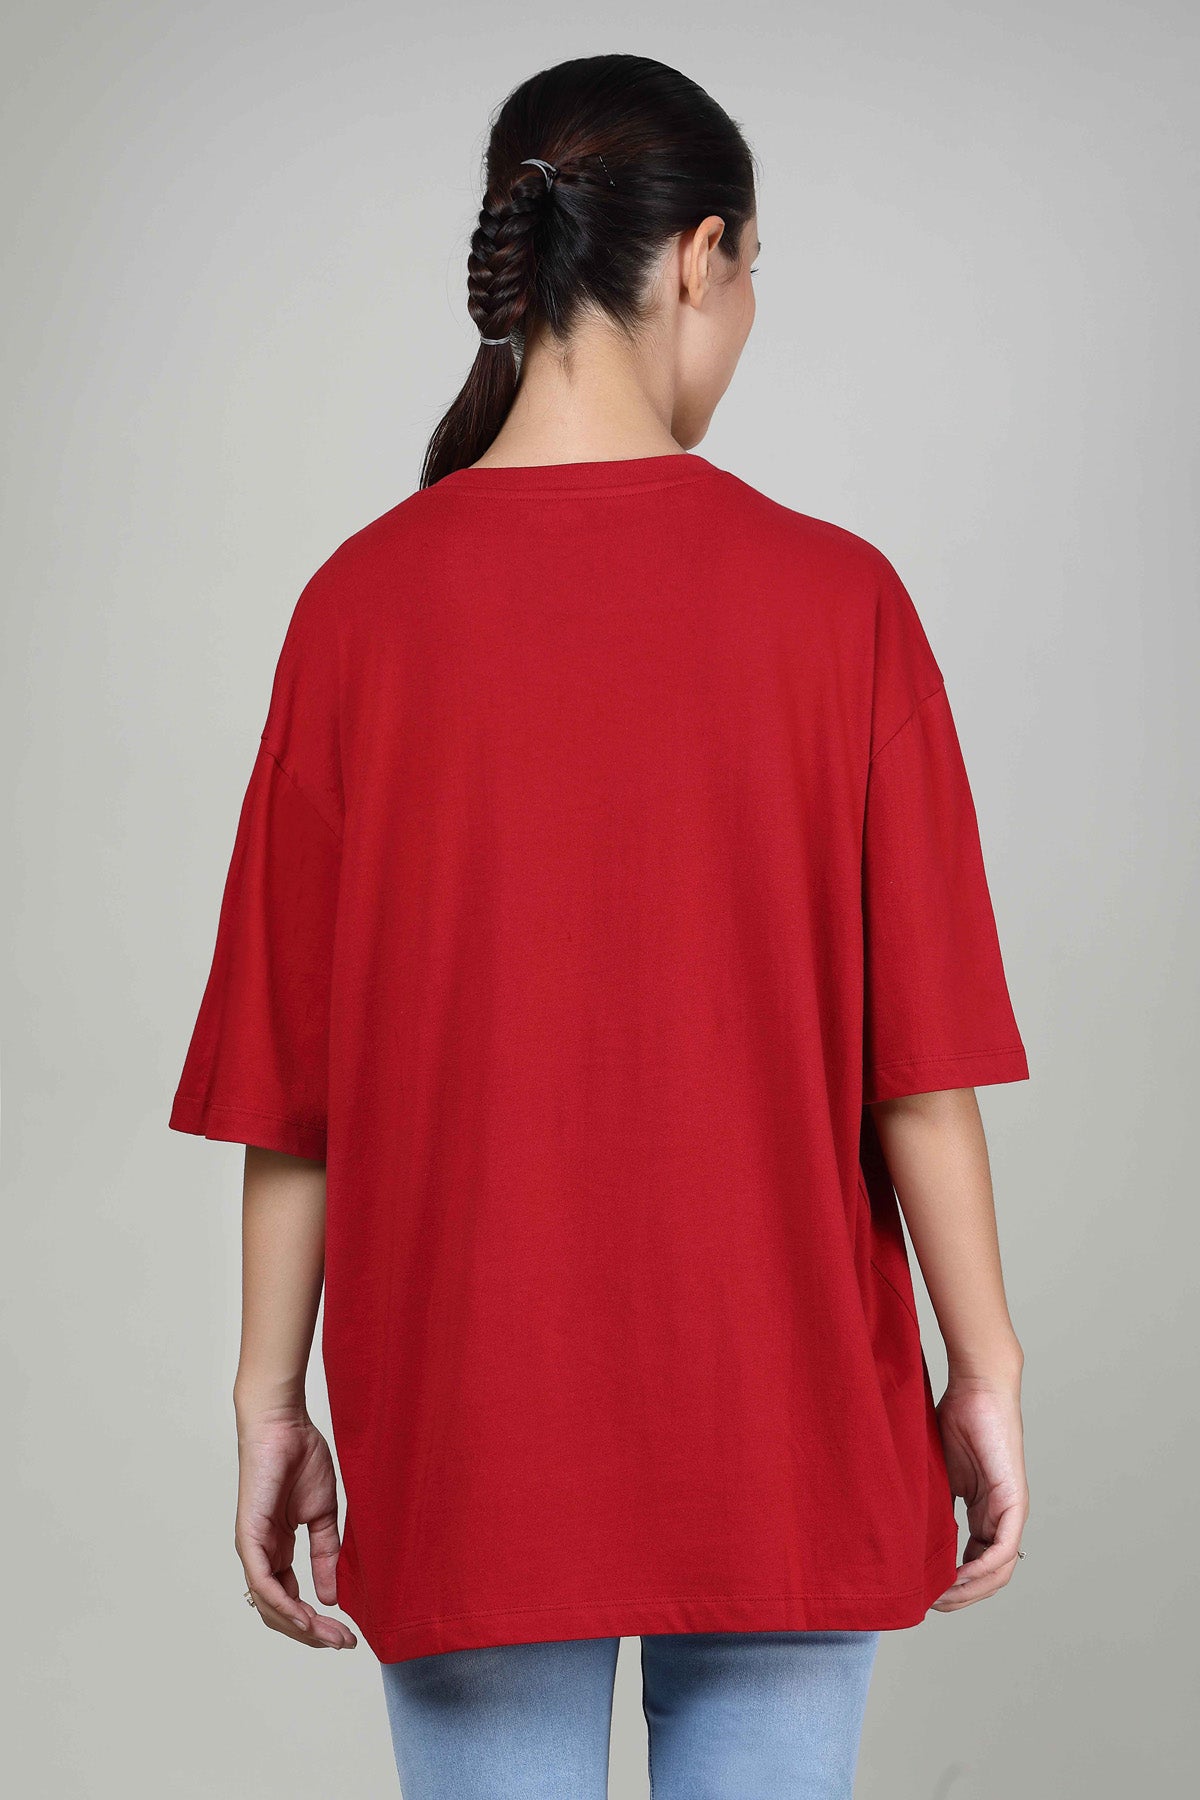 Knockout Red - Oversized Tees